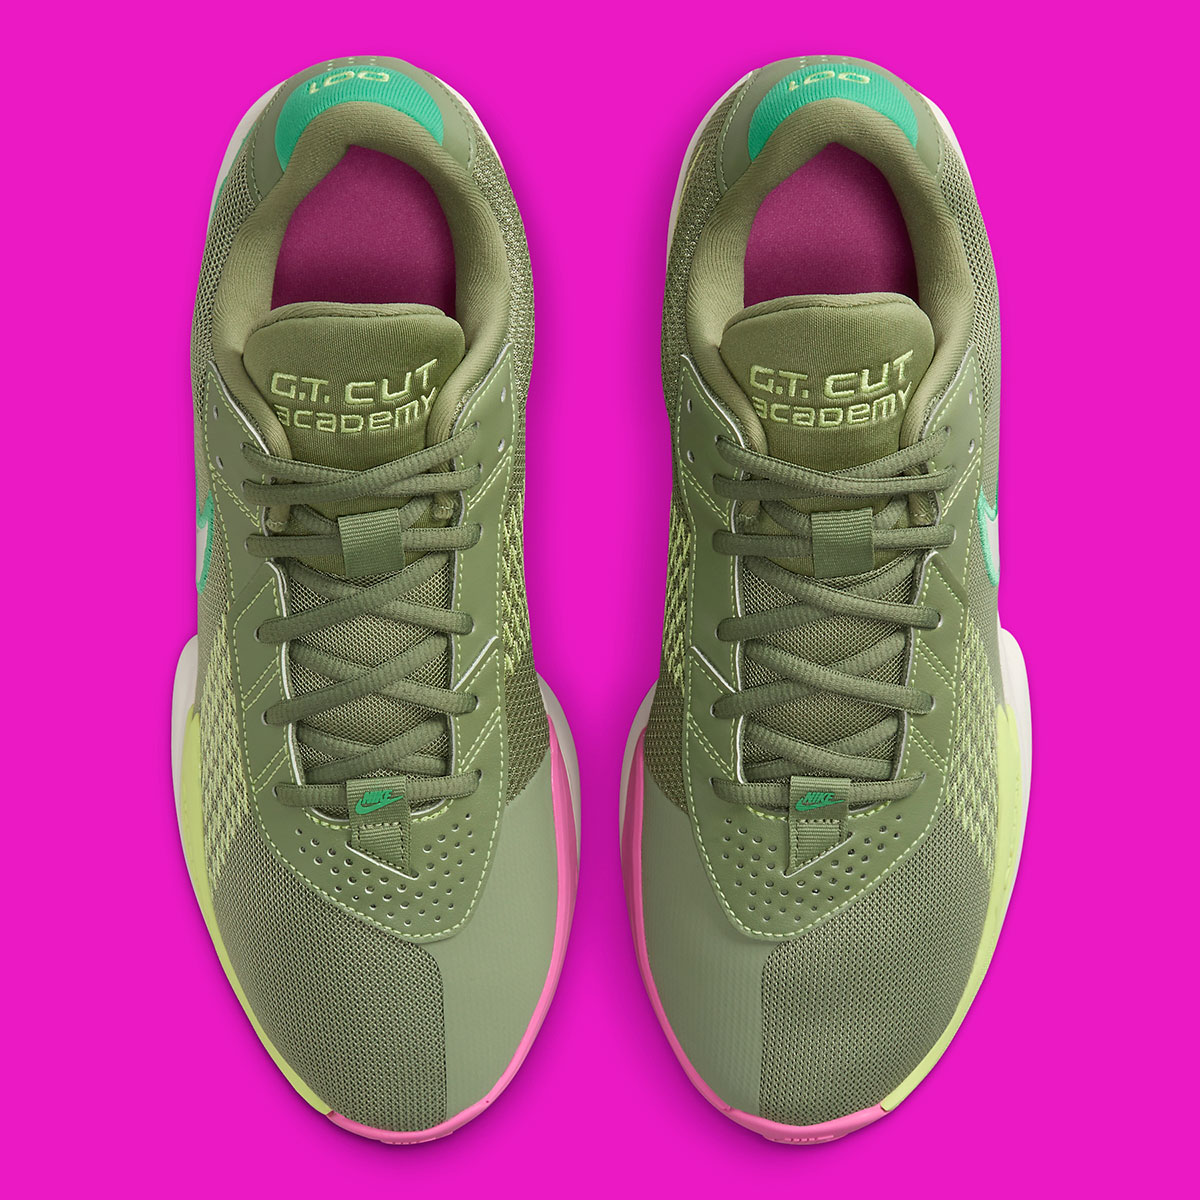 Nike Zoom Gt Cut Academy Olive Pink Barely Volt Fb2599 300 6